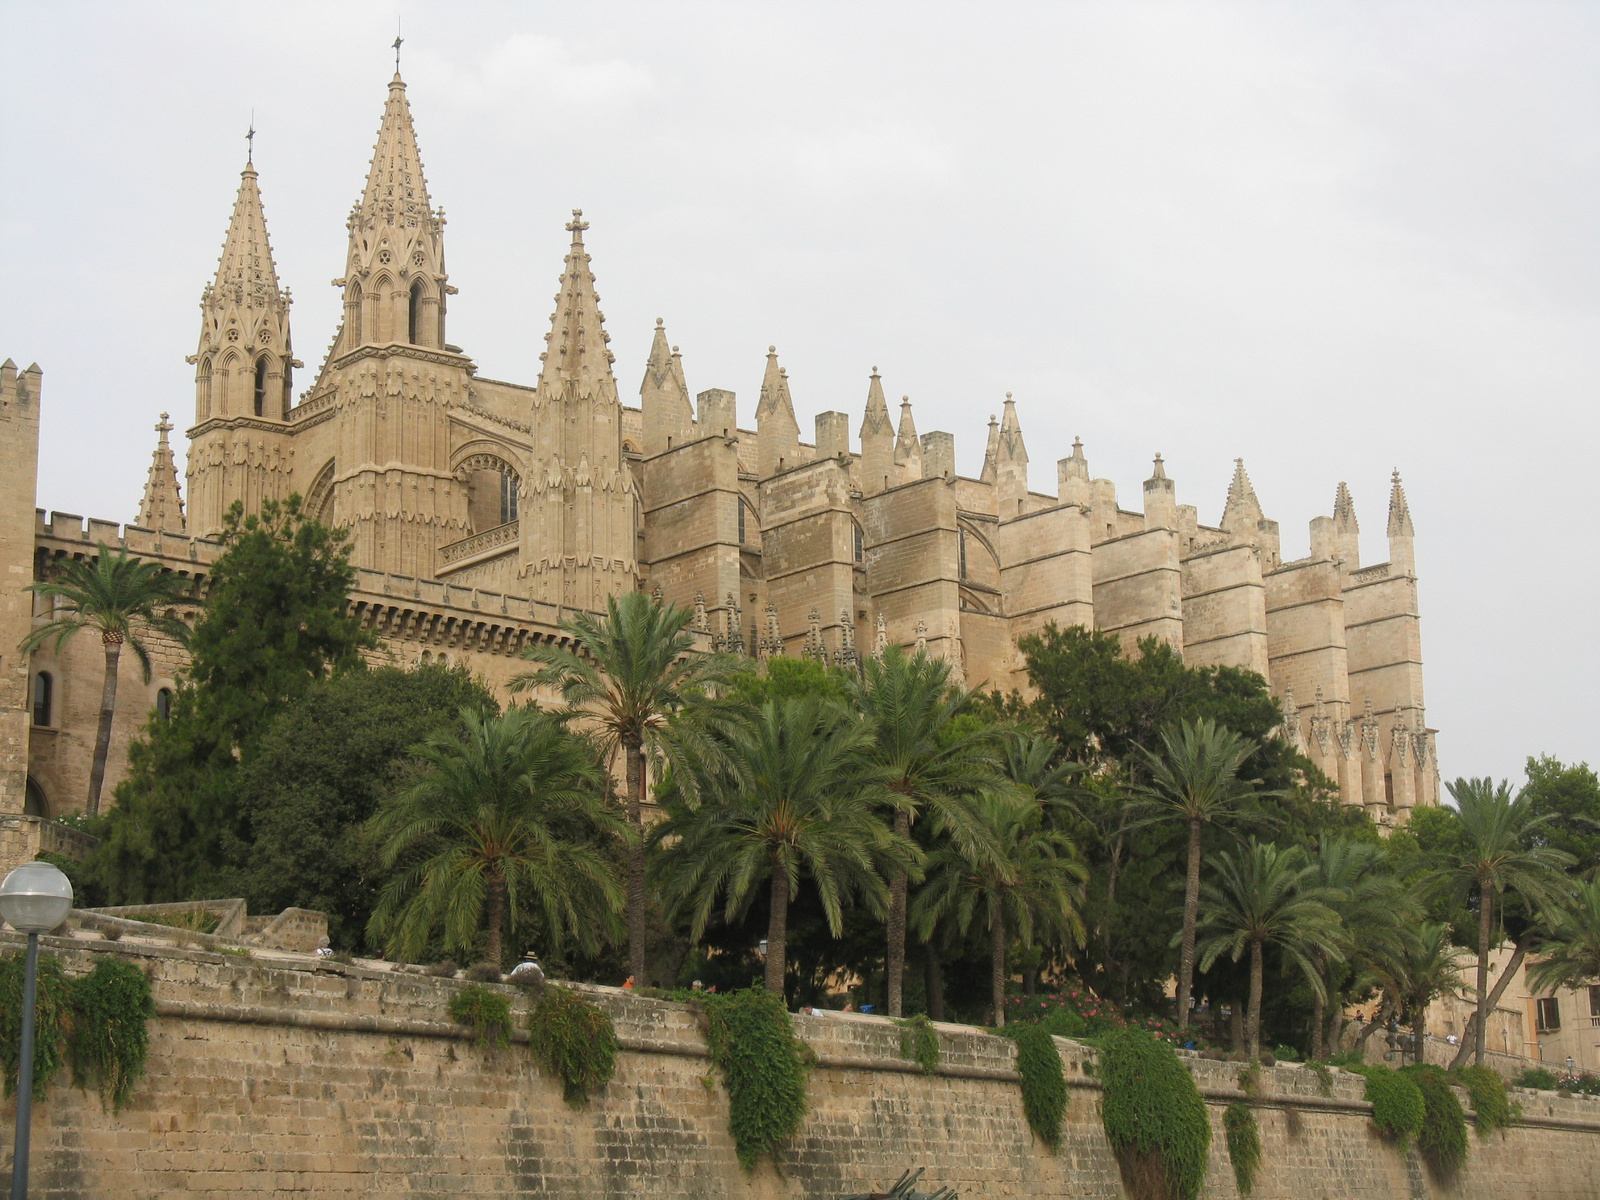 La Seu Cathedral with palm trees